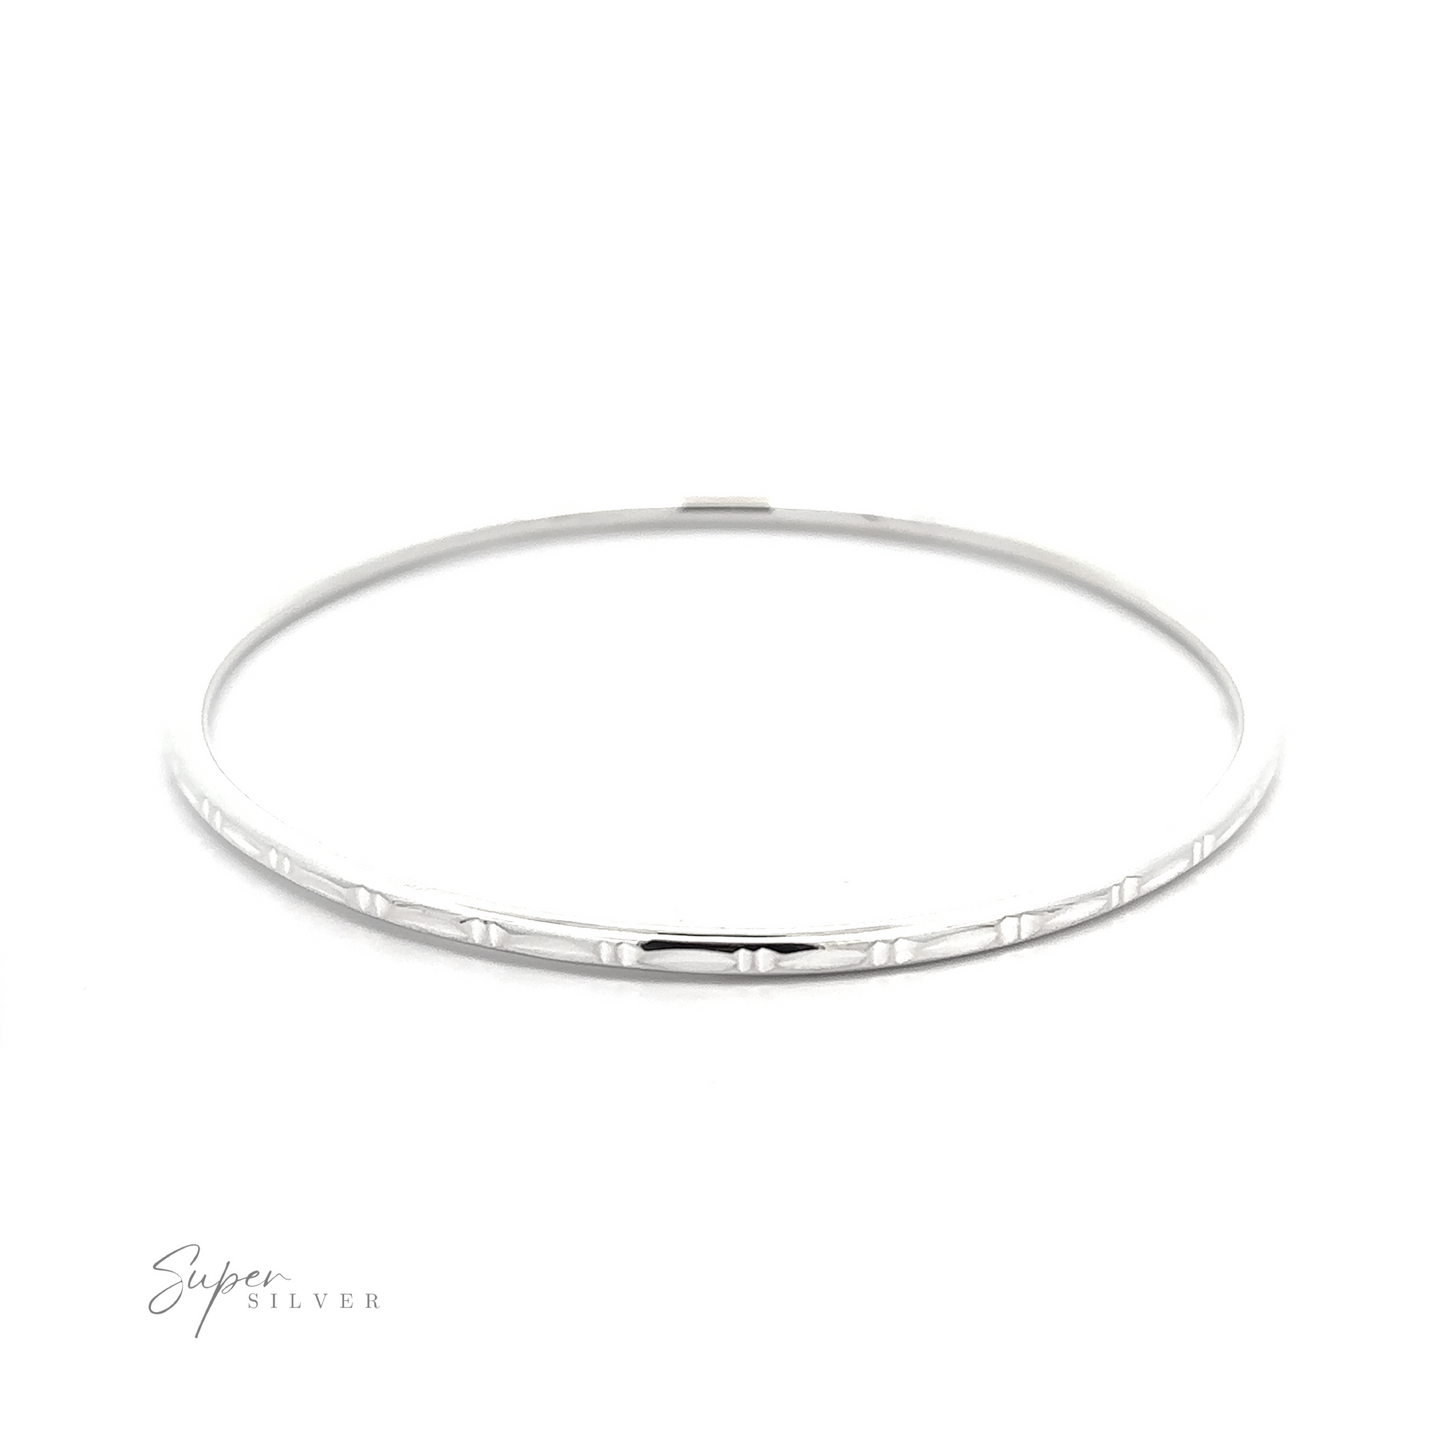 A Silver Bangle Bracelet with Faceted Cut with a bamboo facet cut design on a white background.